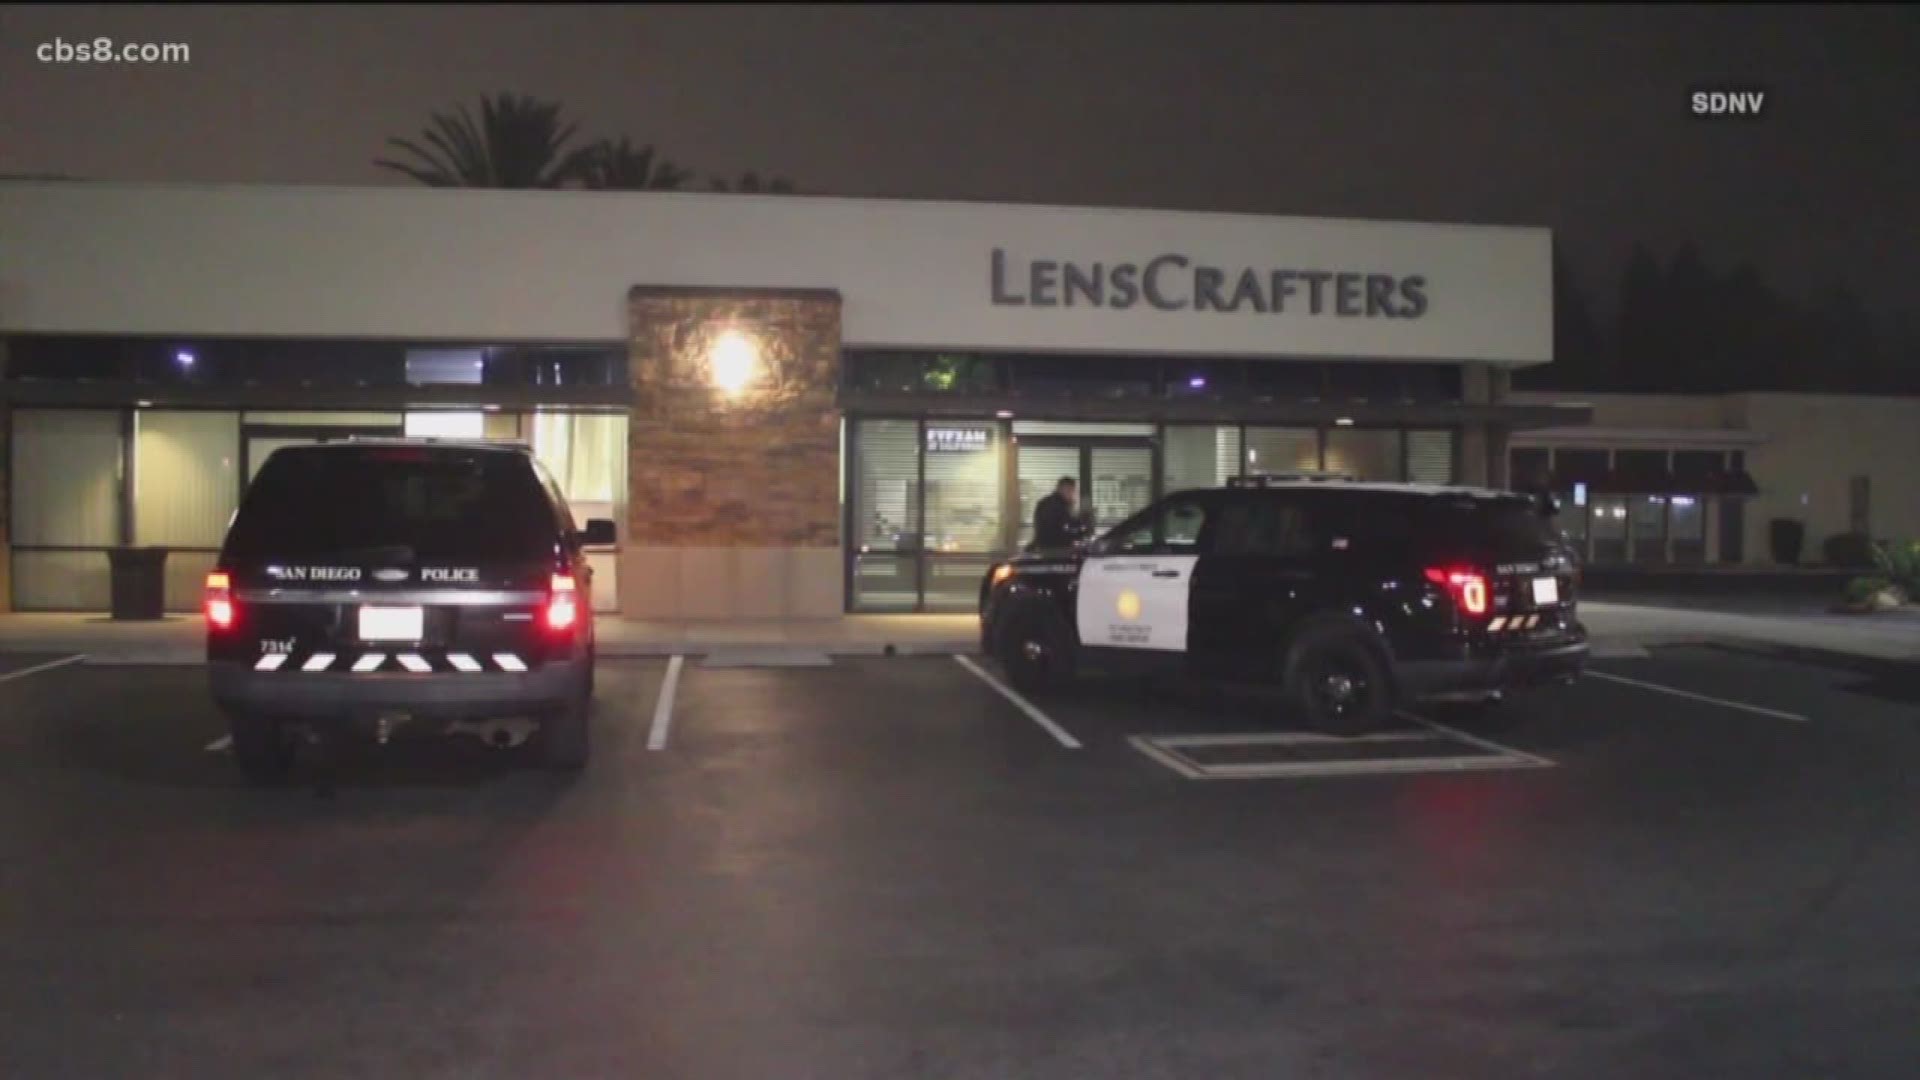 Thieves broke into a Carmel Mountain eyeglasses store Tuesday morning, the latest San Diego-area optometry business to be ransacked in the last few weeks.